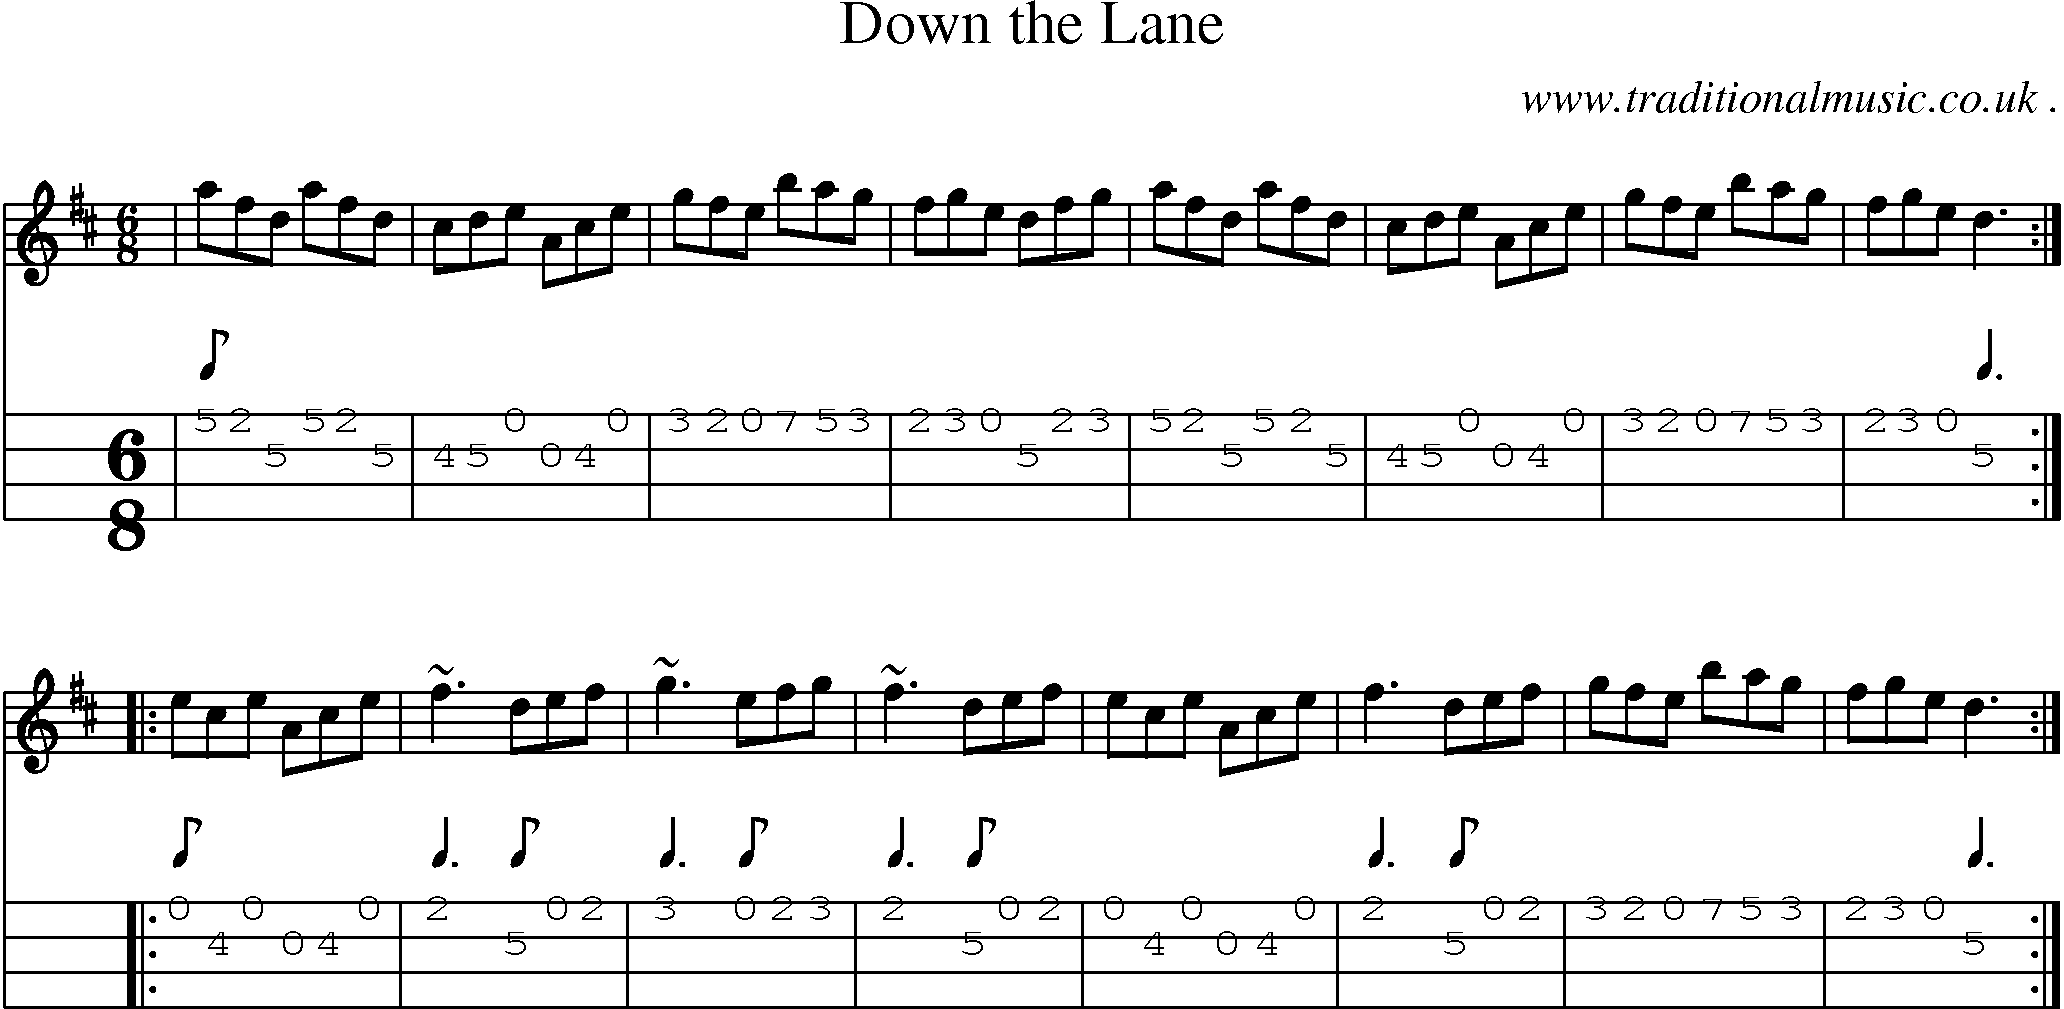 Sheet-music  score, Chords and Mandolin Tabs for Down The Lane